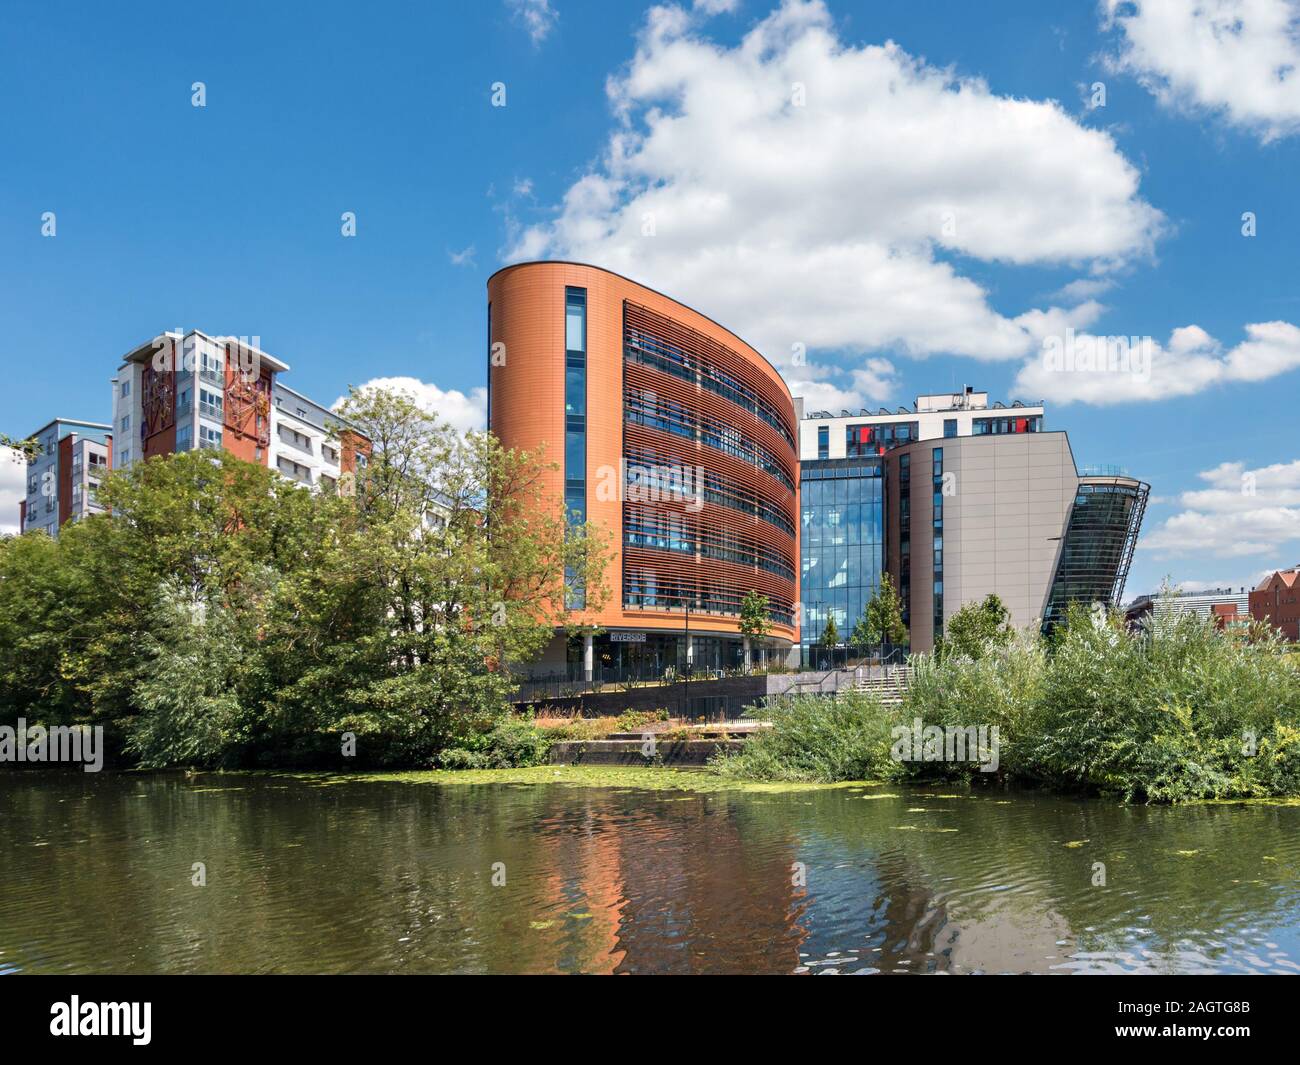 Modern Vijay Patel Building with student accommodation flats (on left) and River Soar in front, De Montford University, Leicester, England, UK Stock Photo